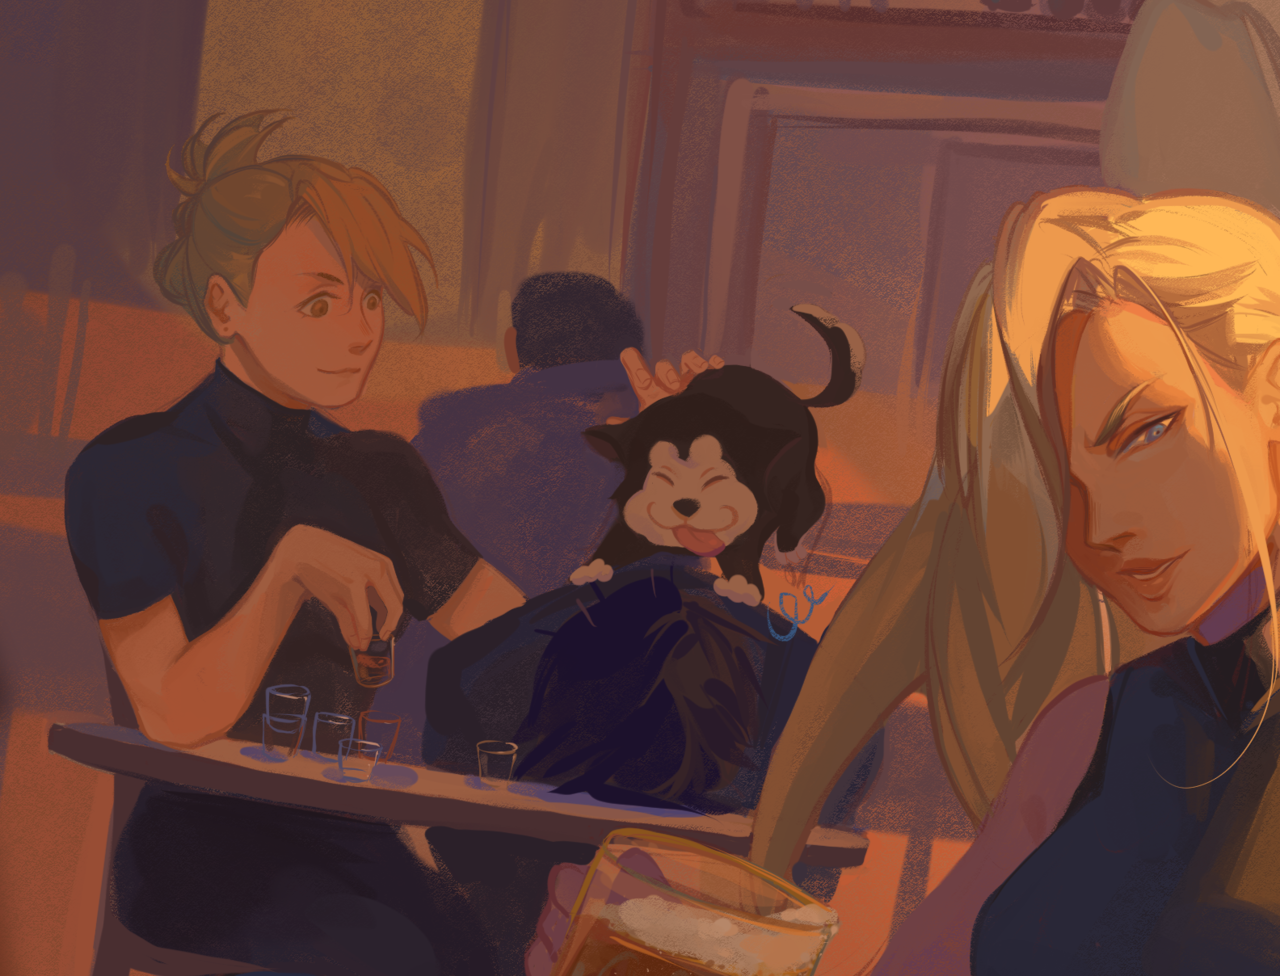 hanromi: FMA After the fight - Wrestle!! A more lighthearted scene featuring the